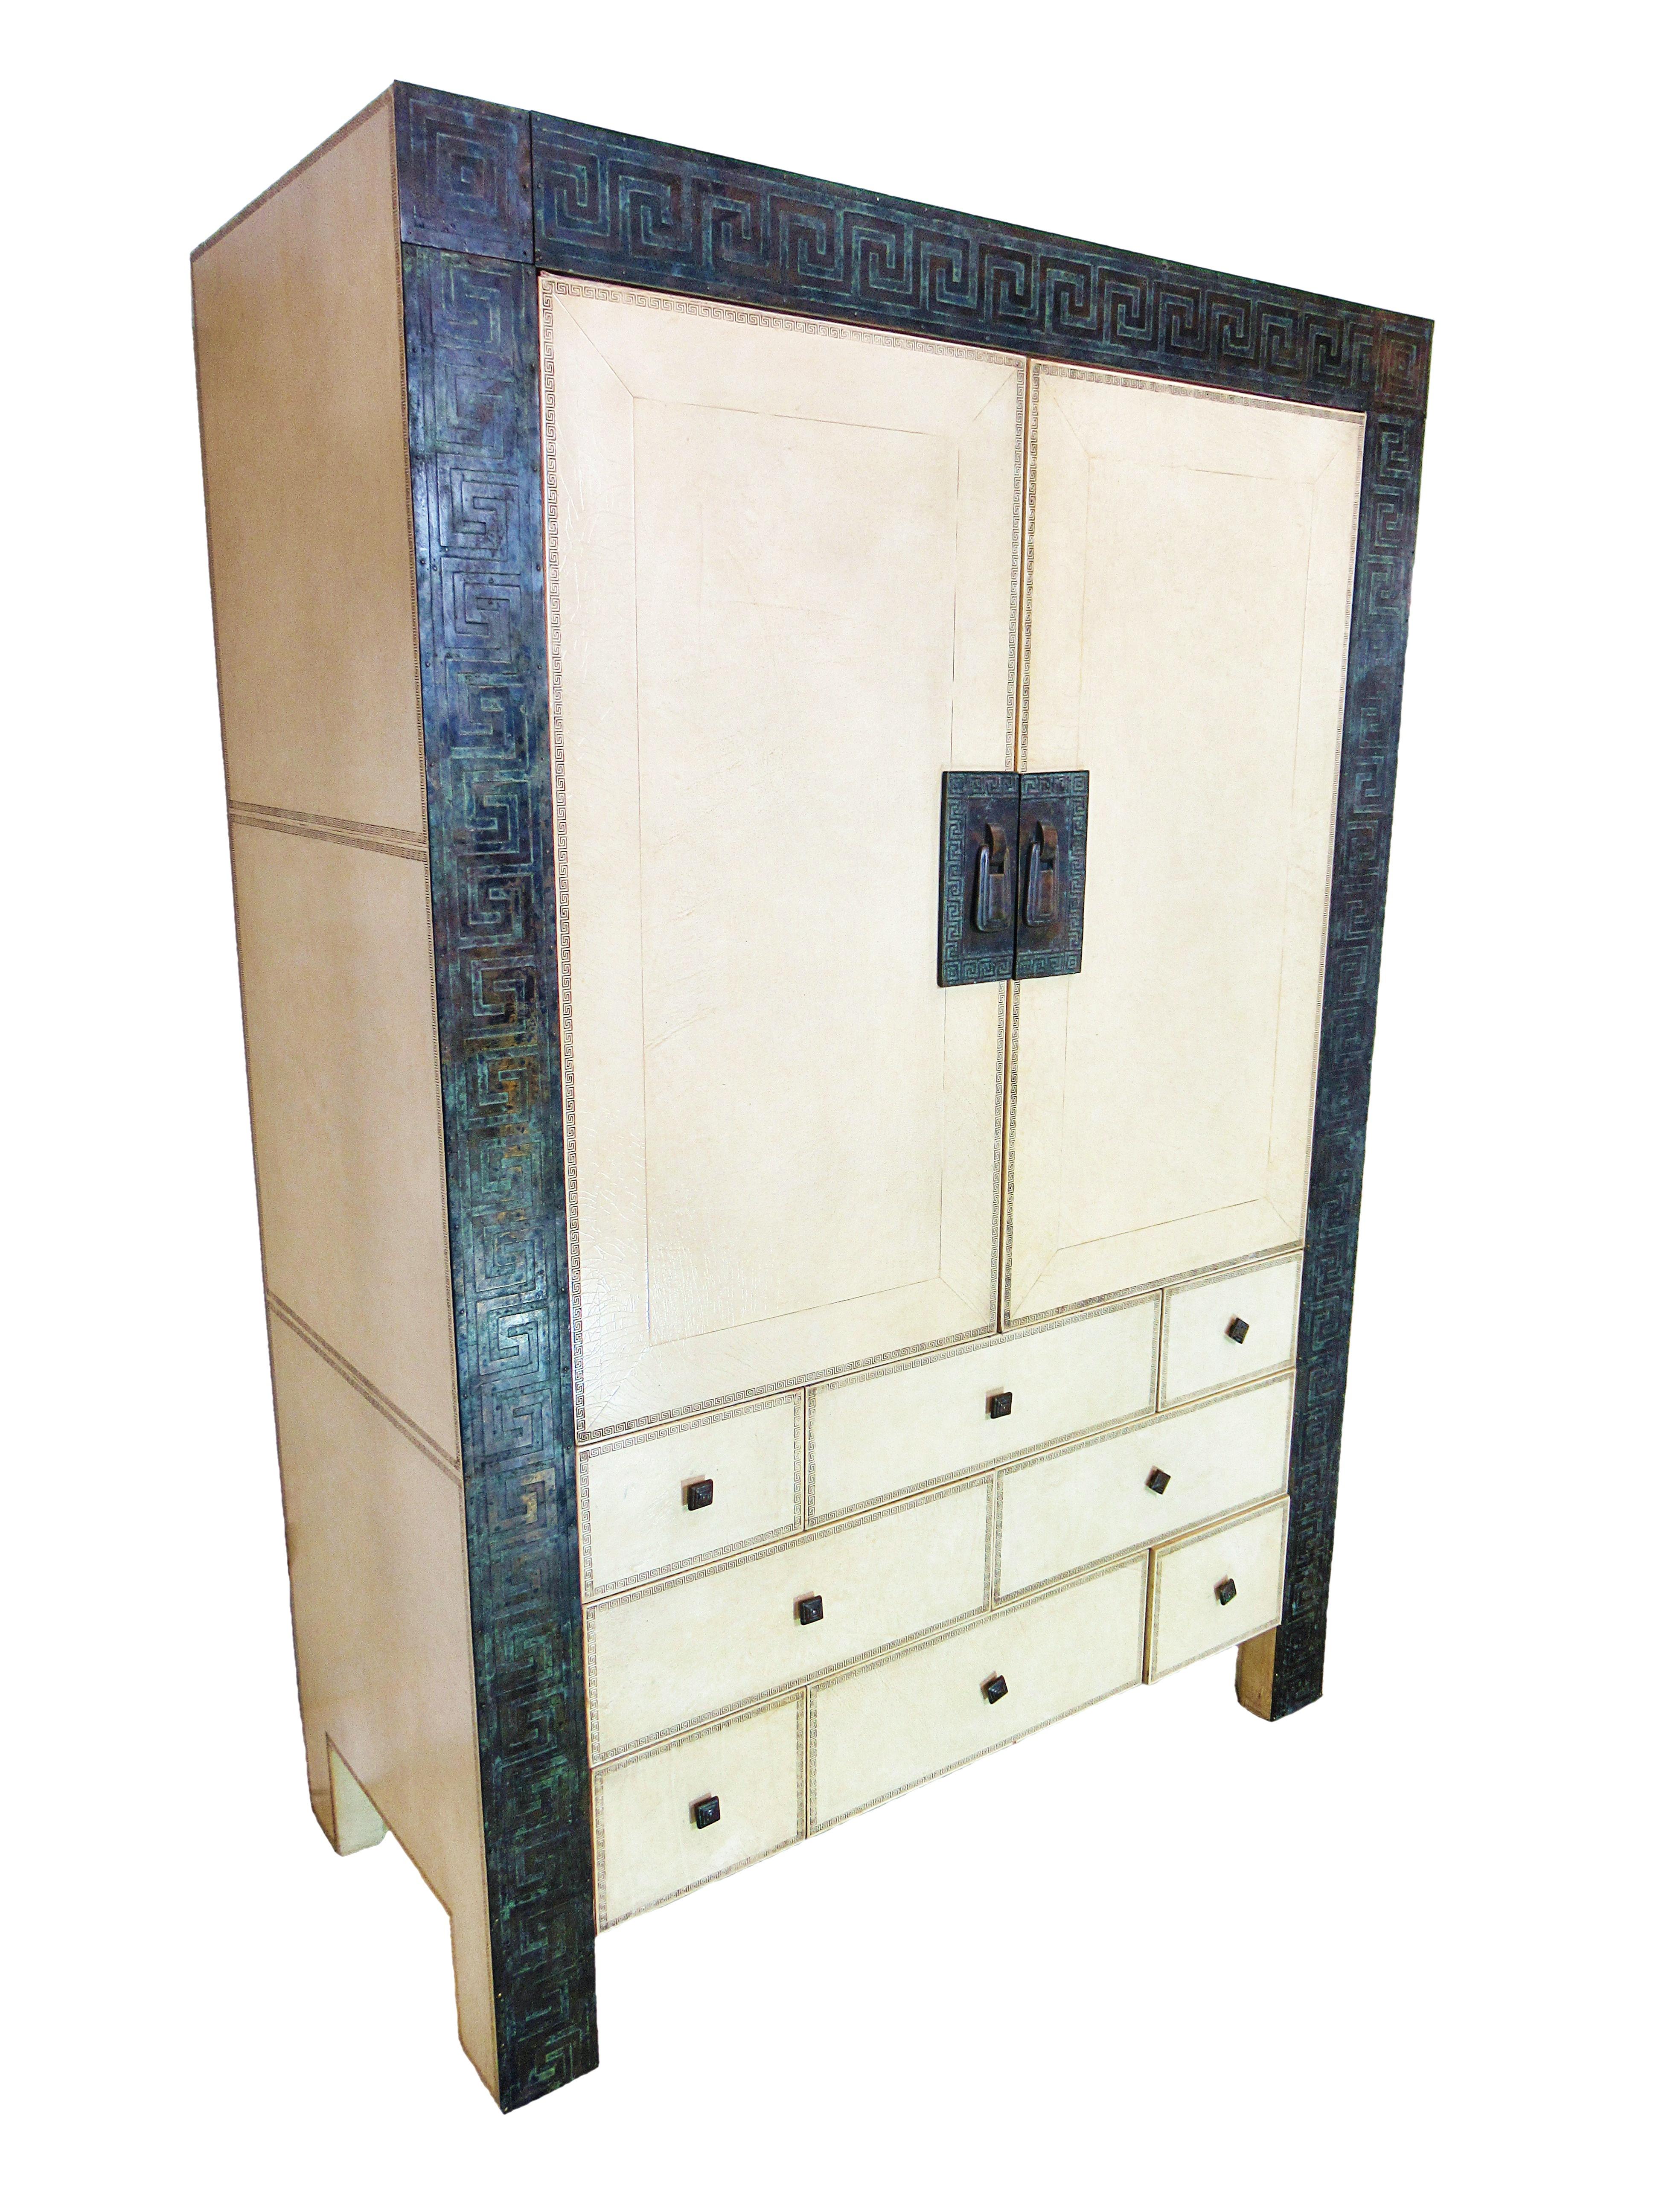 The piece overall in leather and parchment with fine gold embossing, the perimeter of the piece with applied bronze mouts with overall Greek key motif. The upper section with two doors revealing glass shelved areas for liquor and glass storage, the